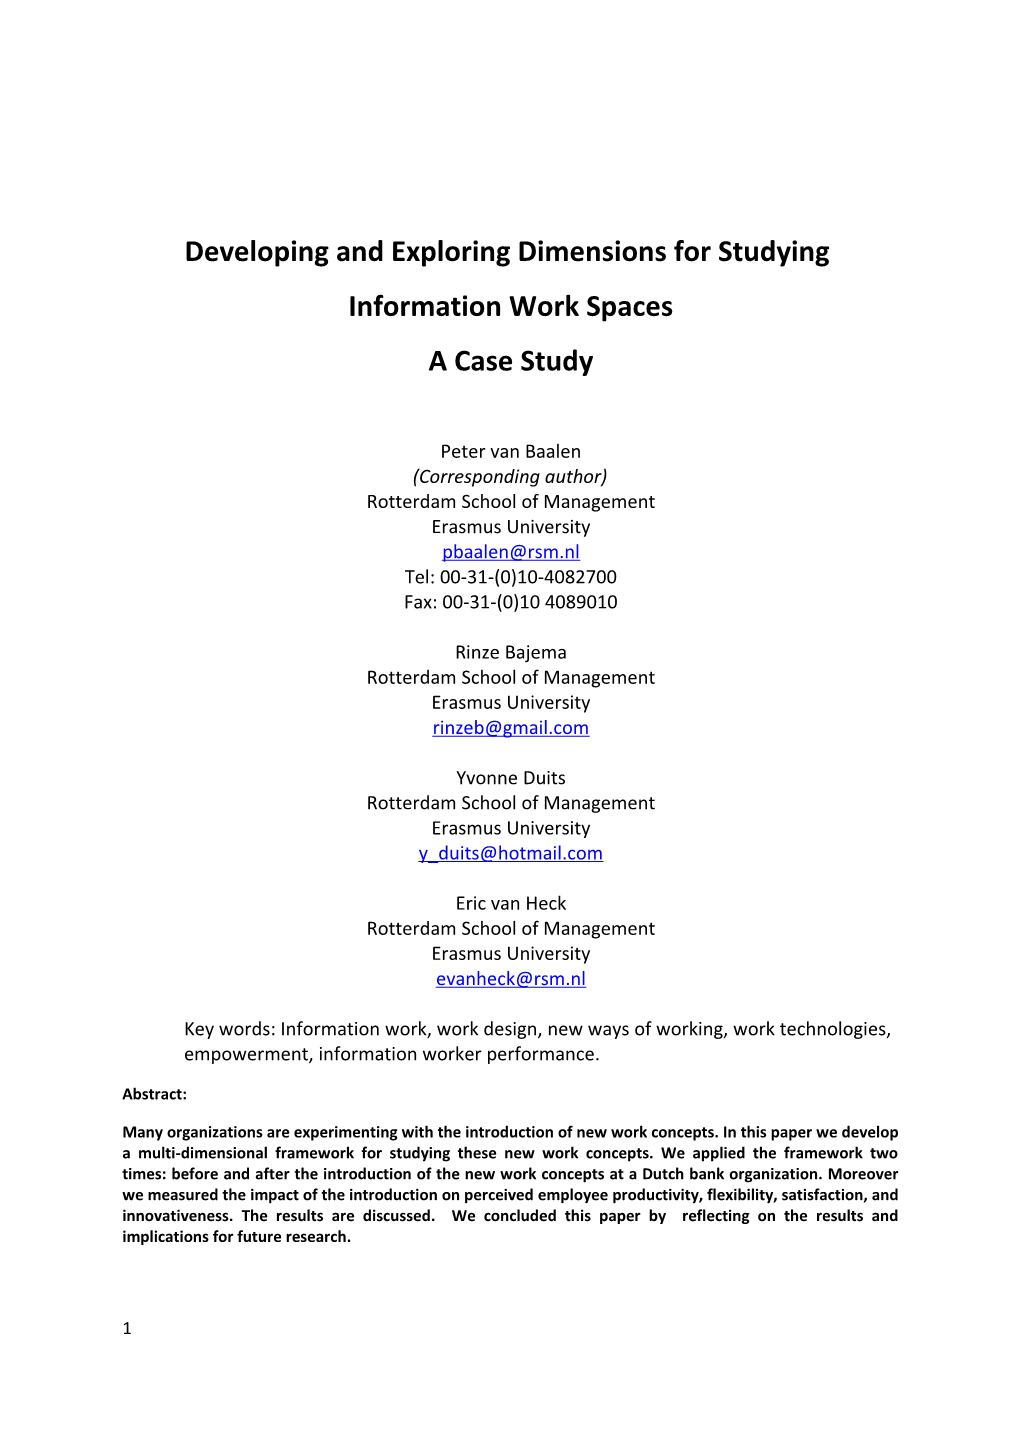 Developing and Exploring Dimensions Forstudying